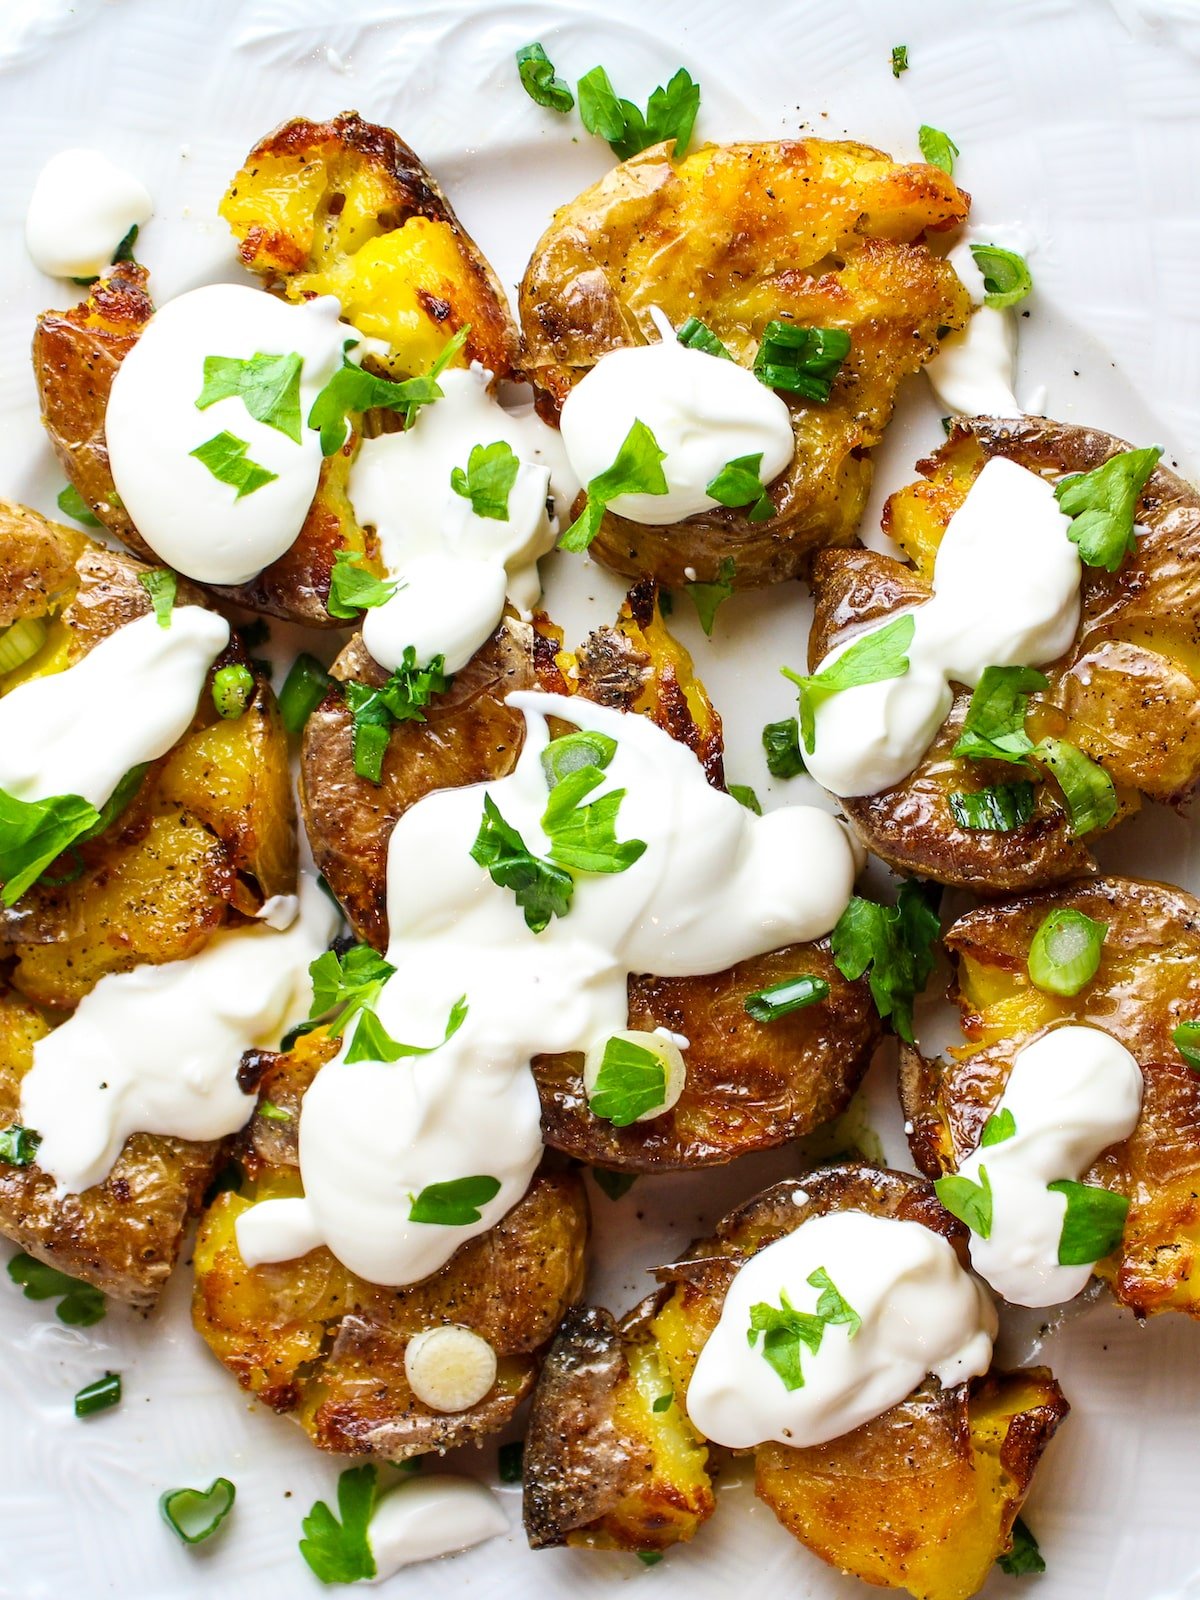 Sour Cream and Onion Smashed Potatoes on a plate.